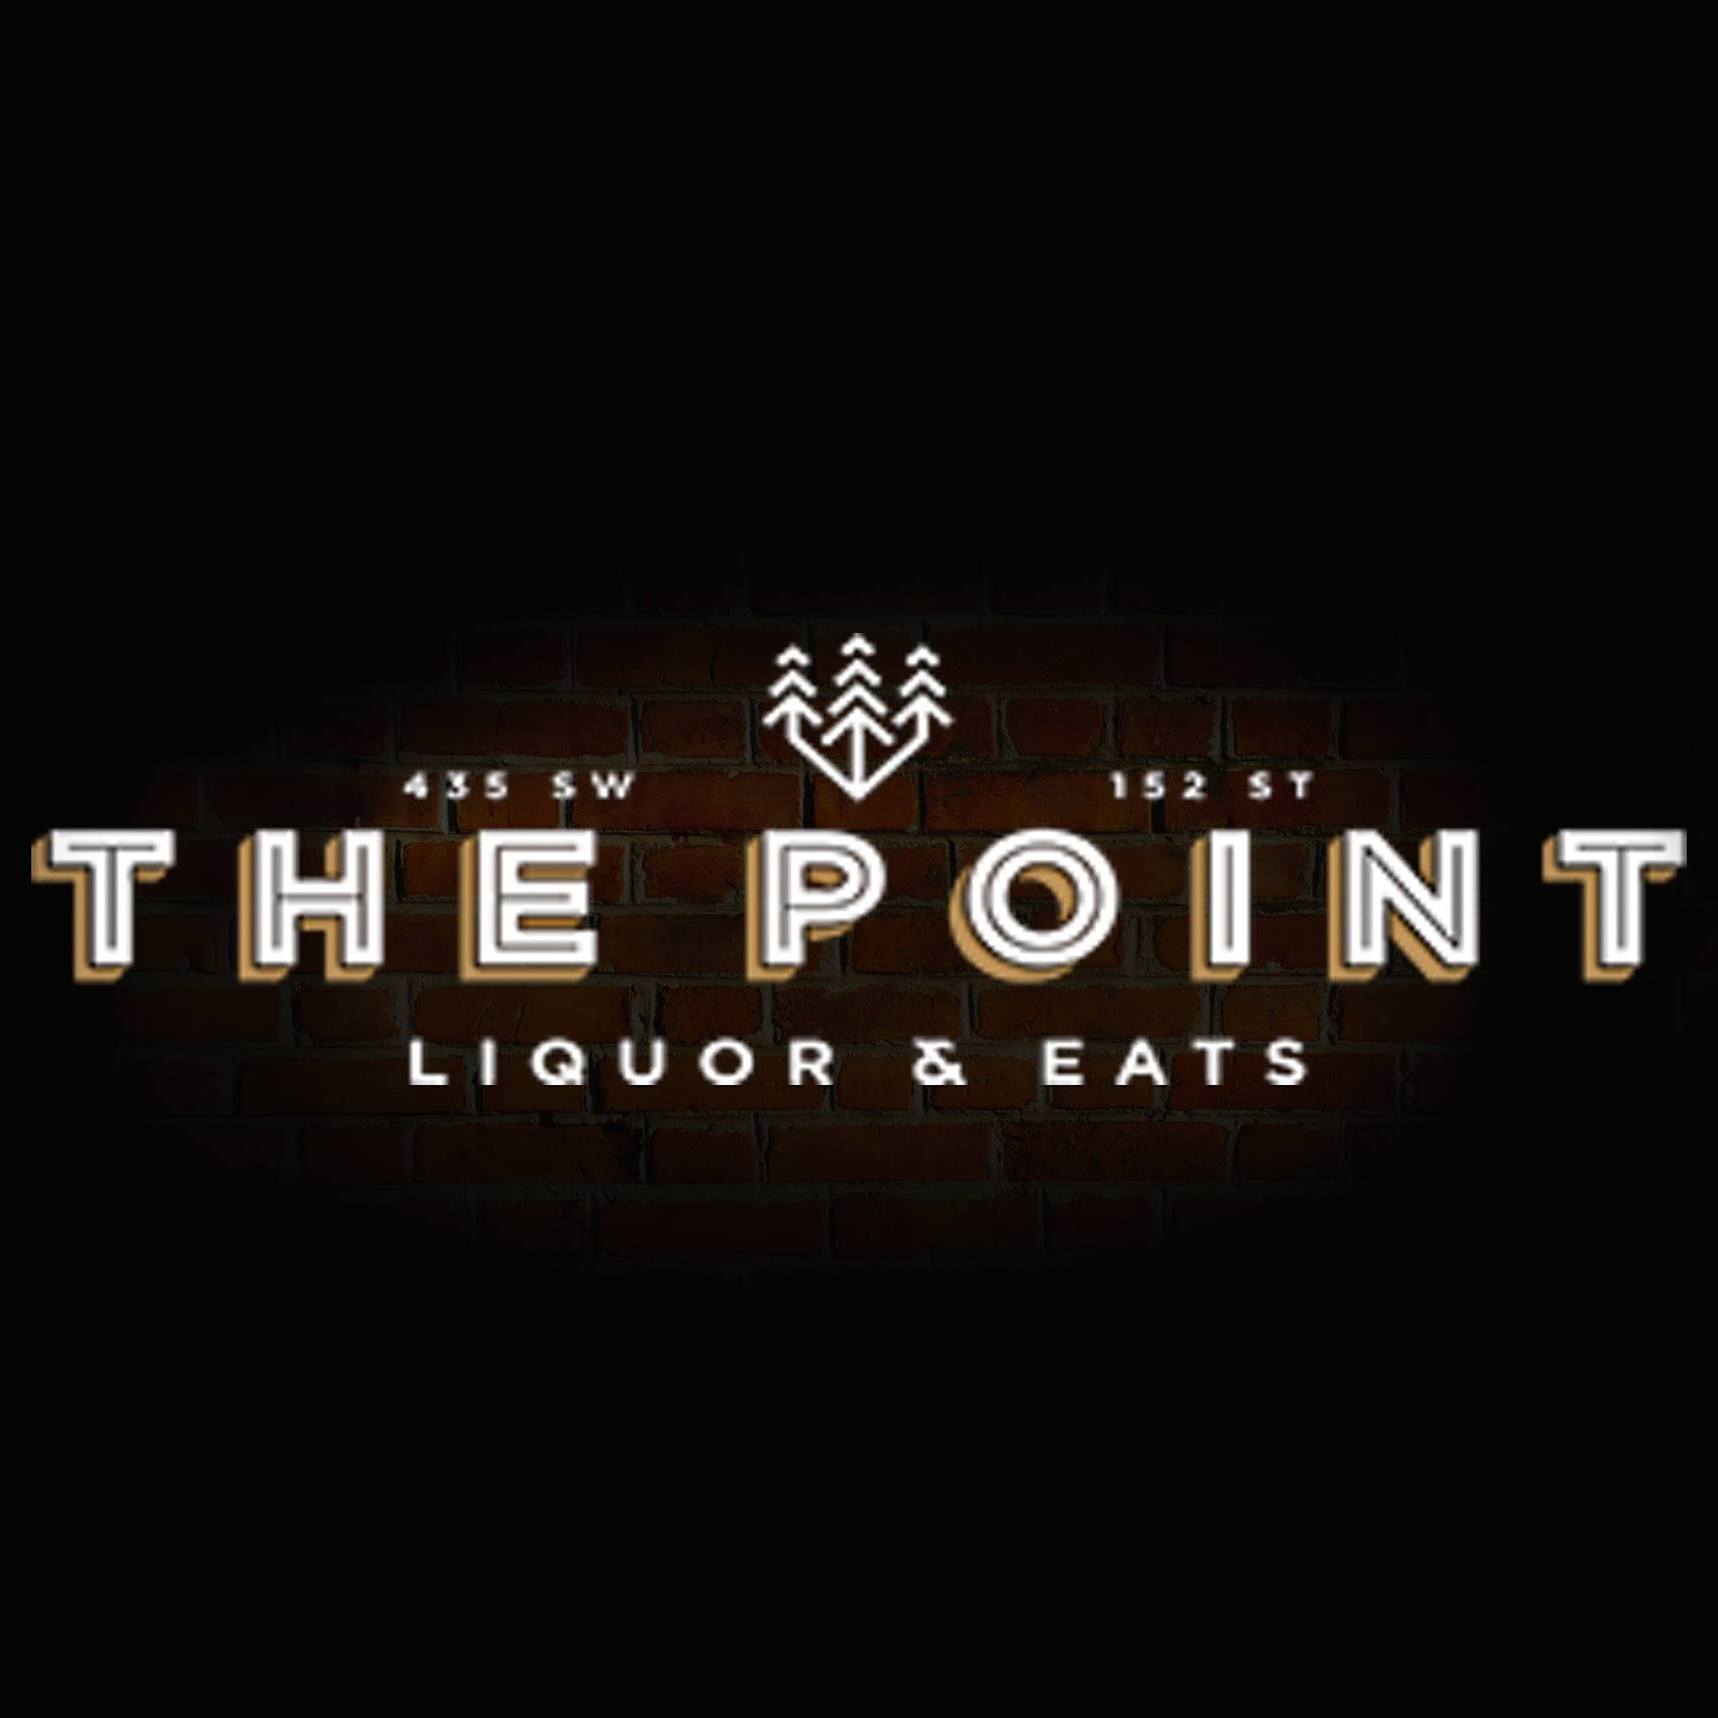 Business logo of The Point